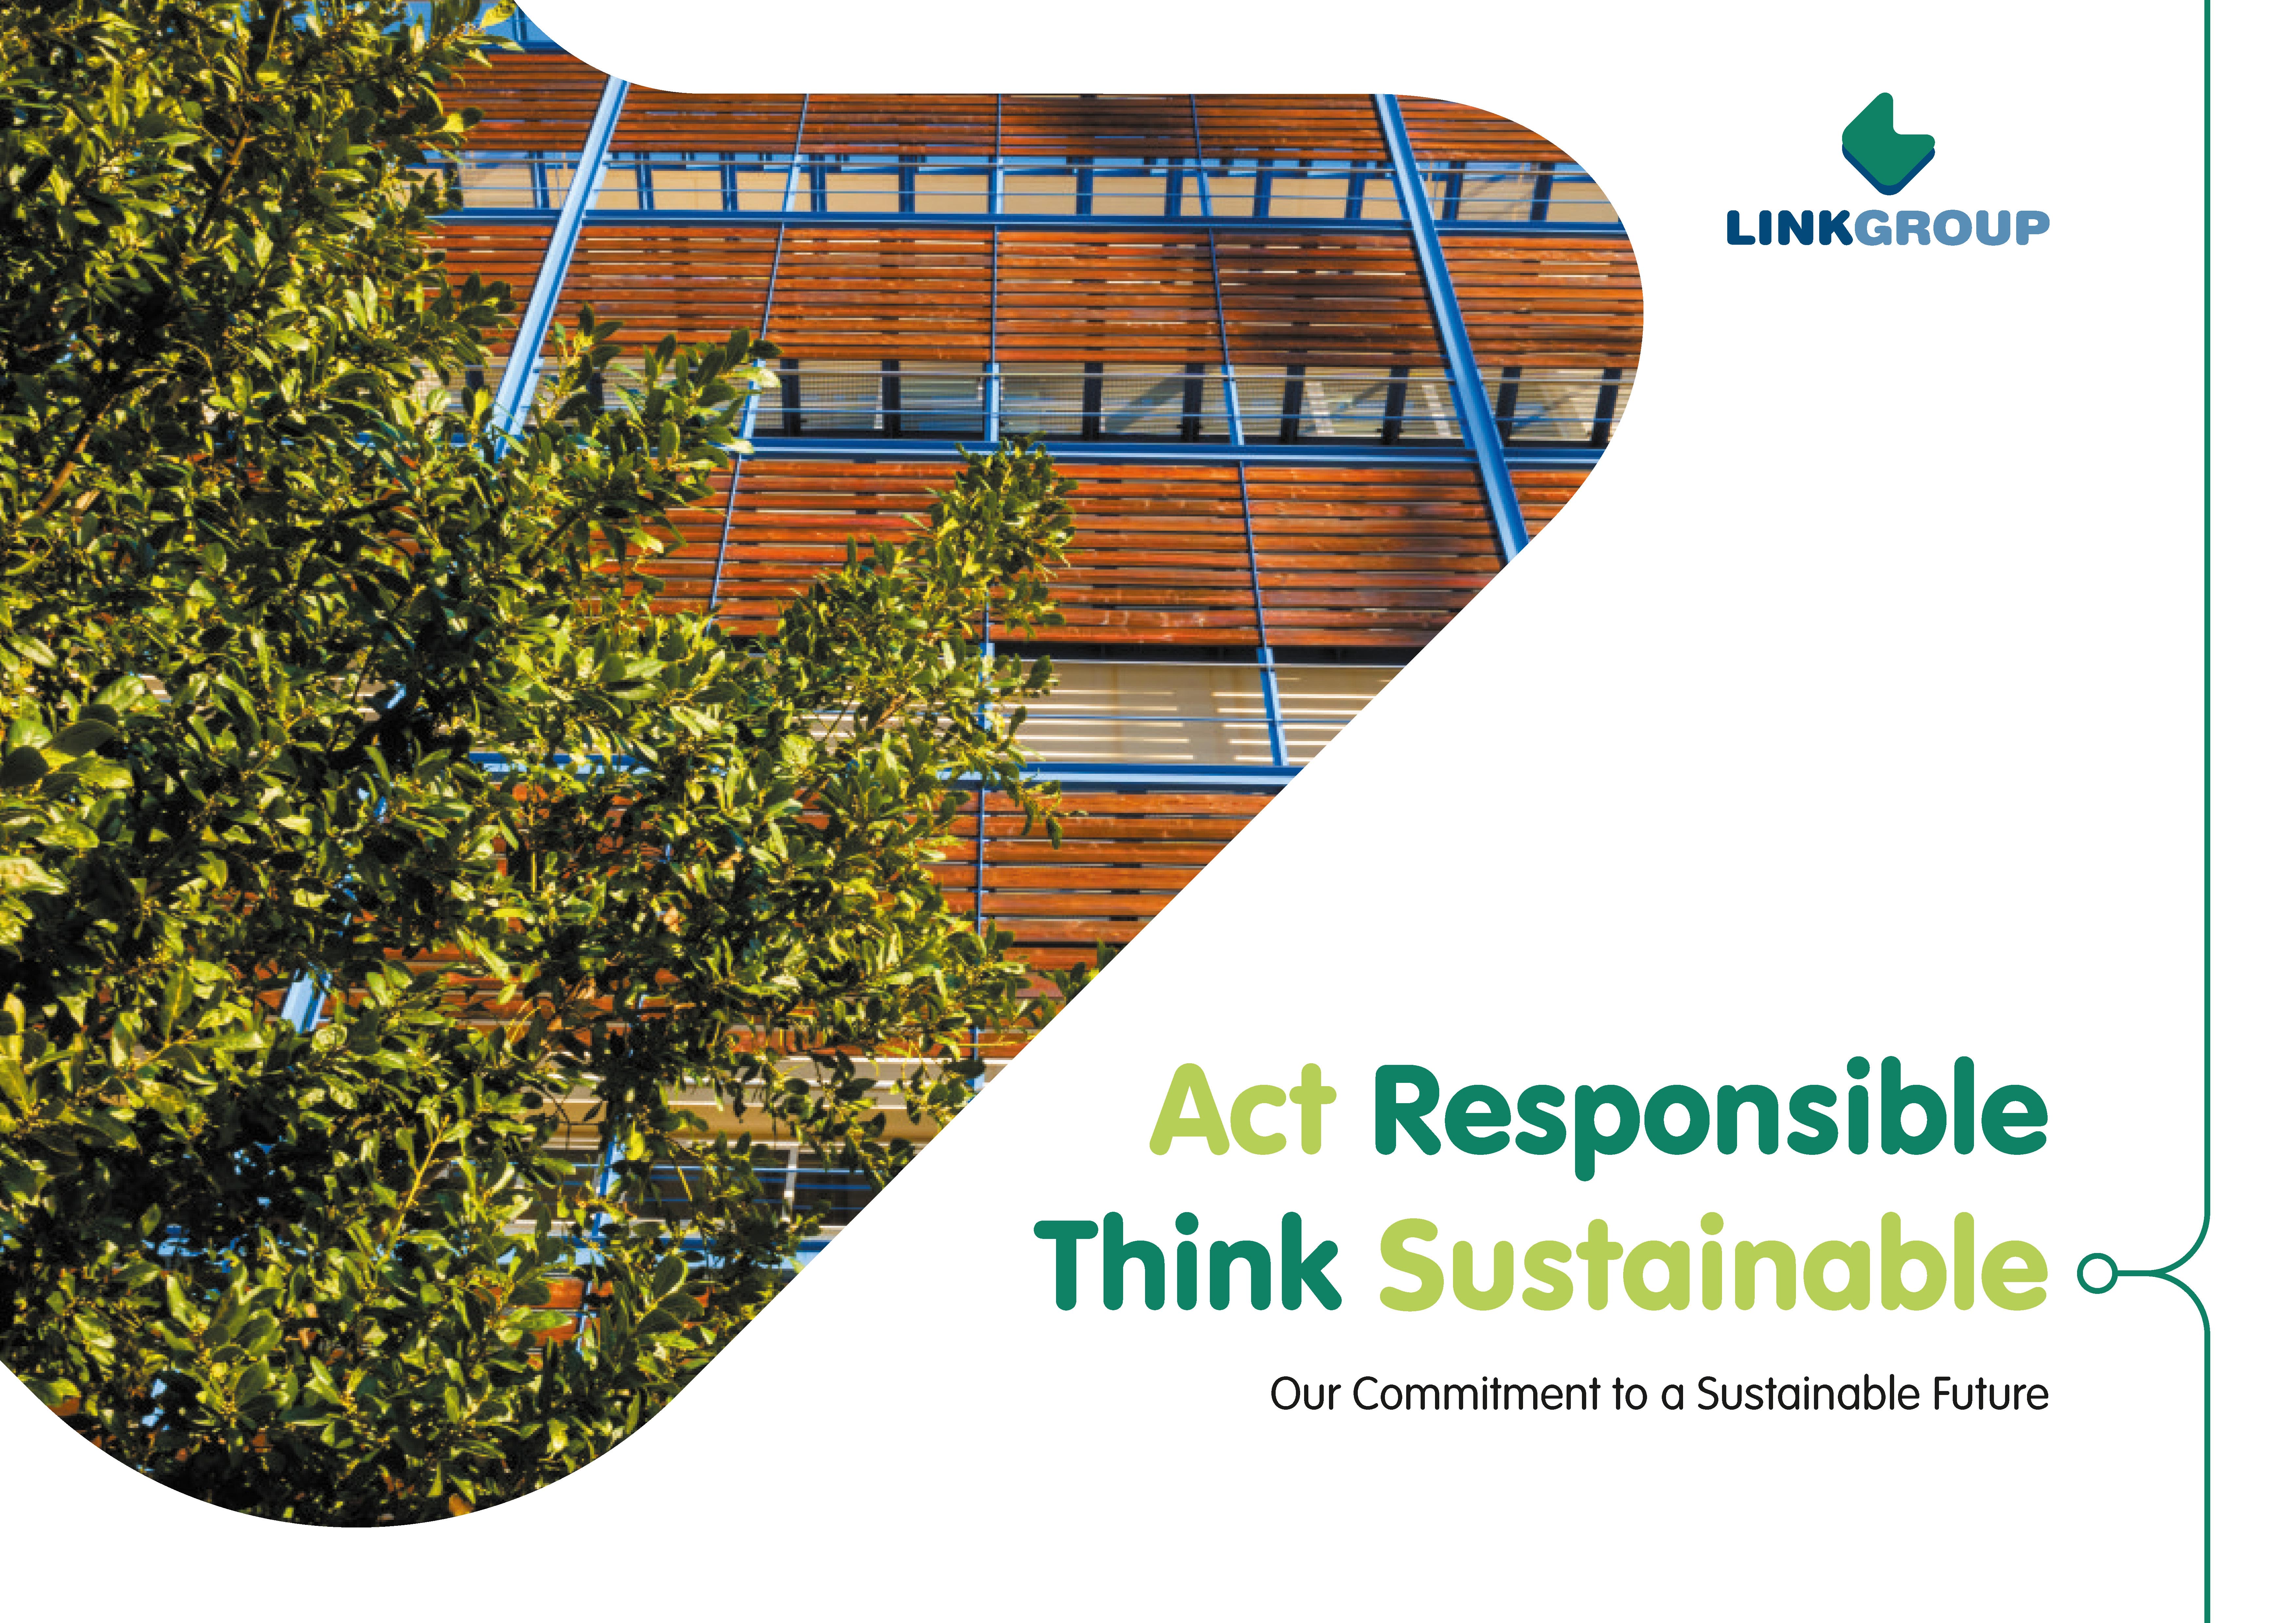 Link Group steps up sustainability commitment in its 60th year